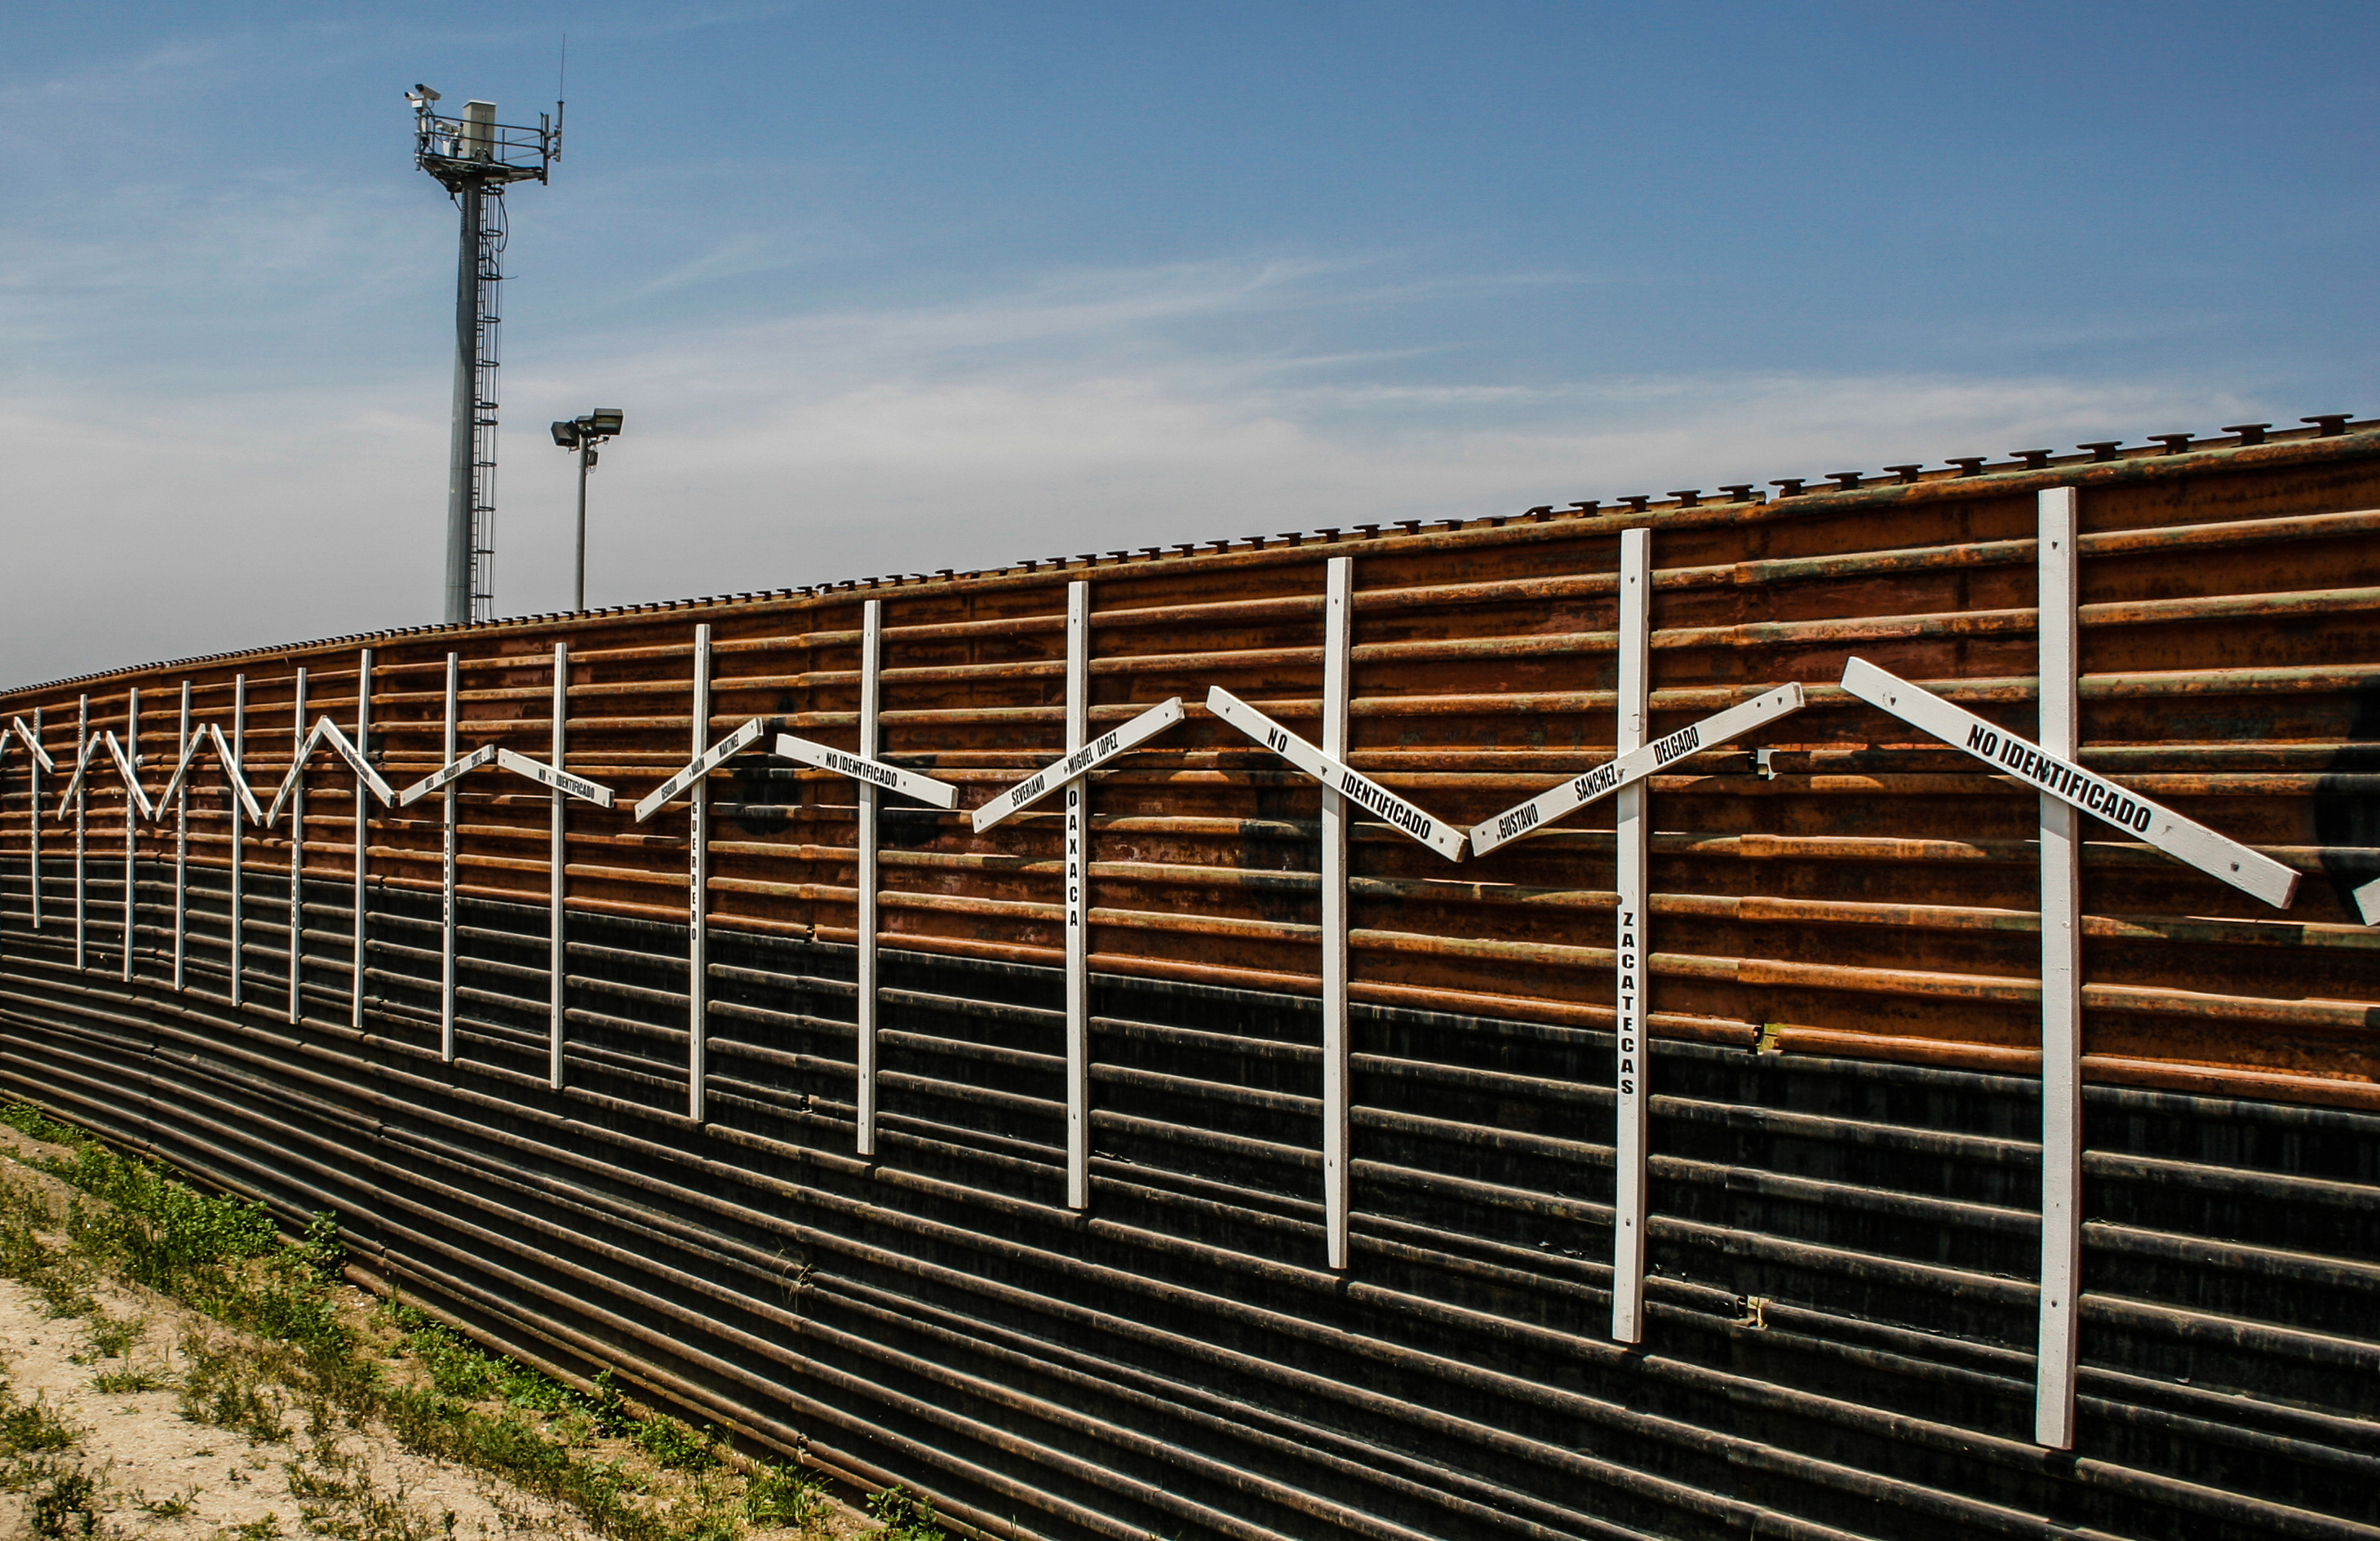 More than 1,000 apprehended at US-Mexico border